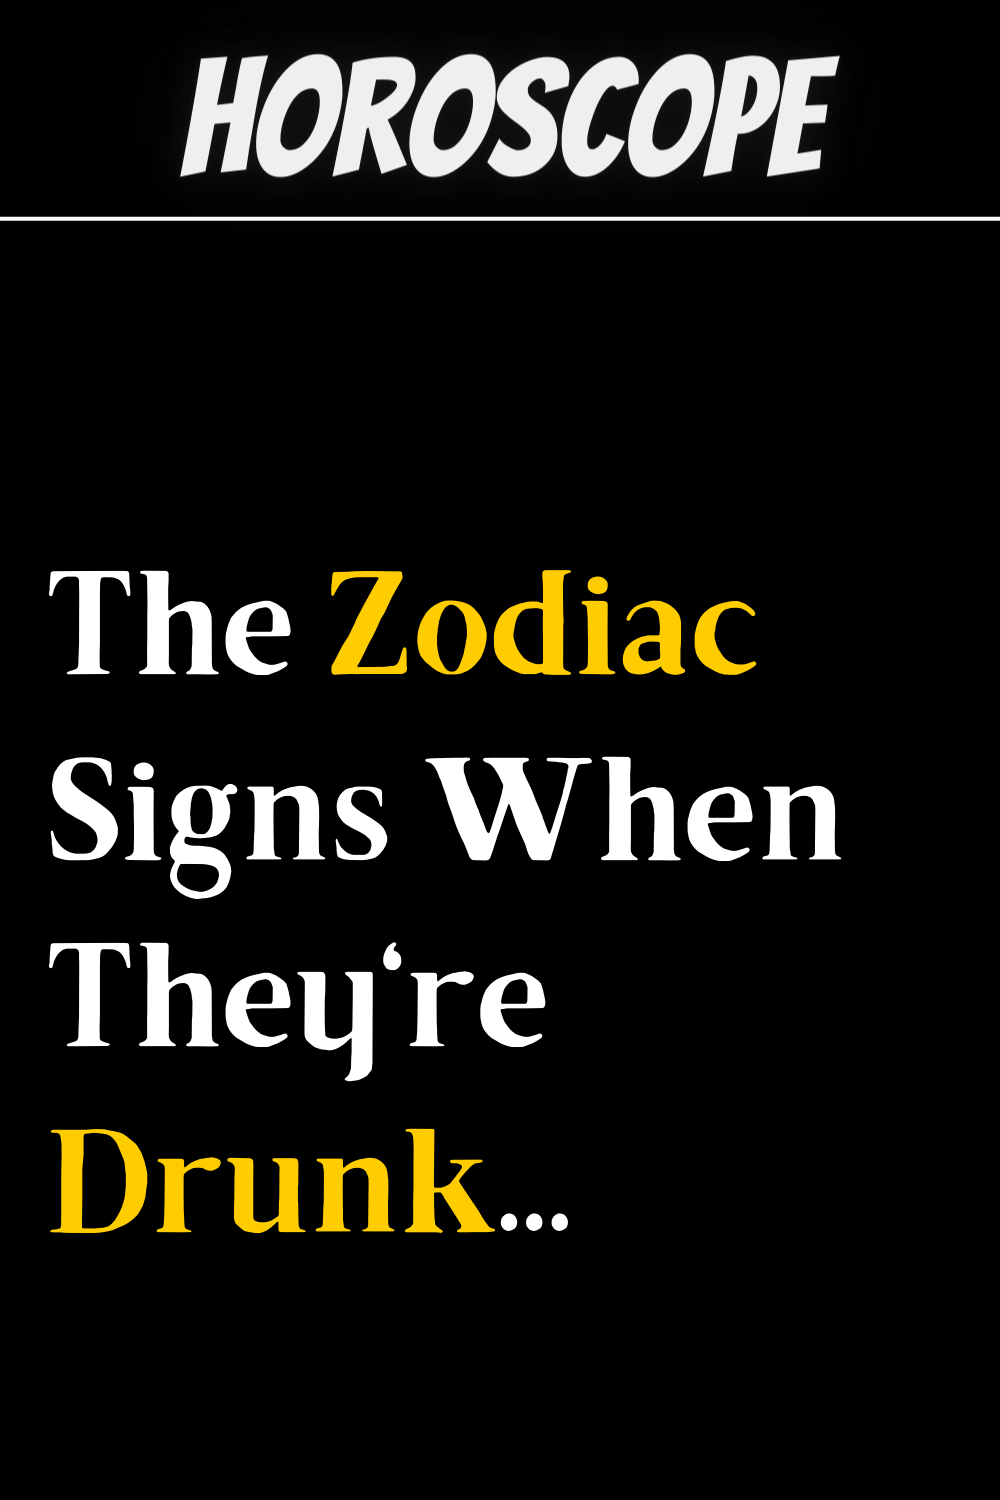 The Zodiac Signs When They're Drunk